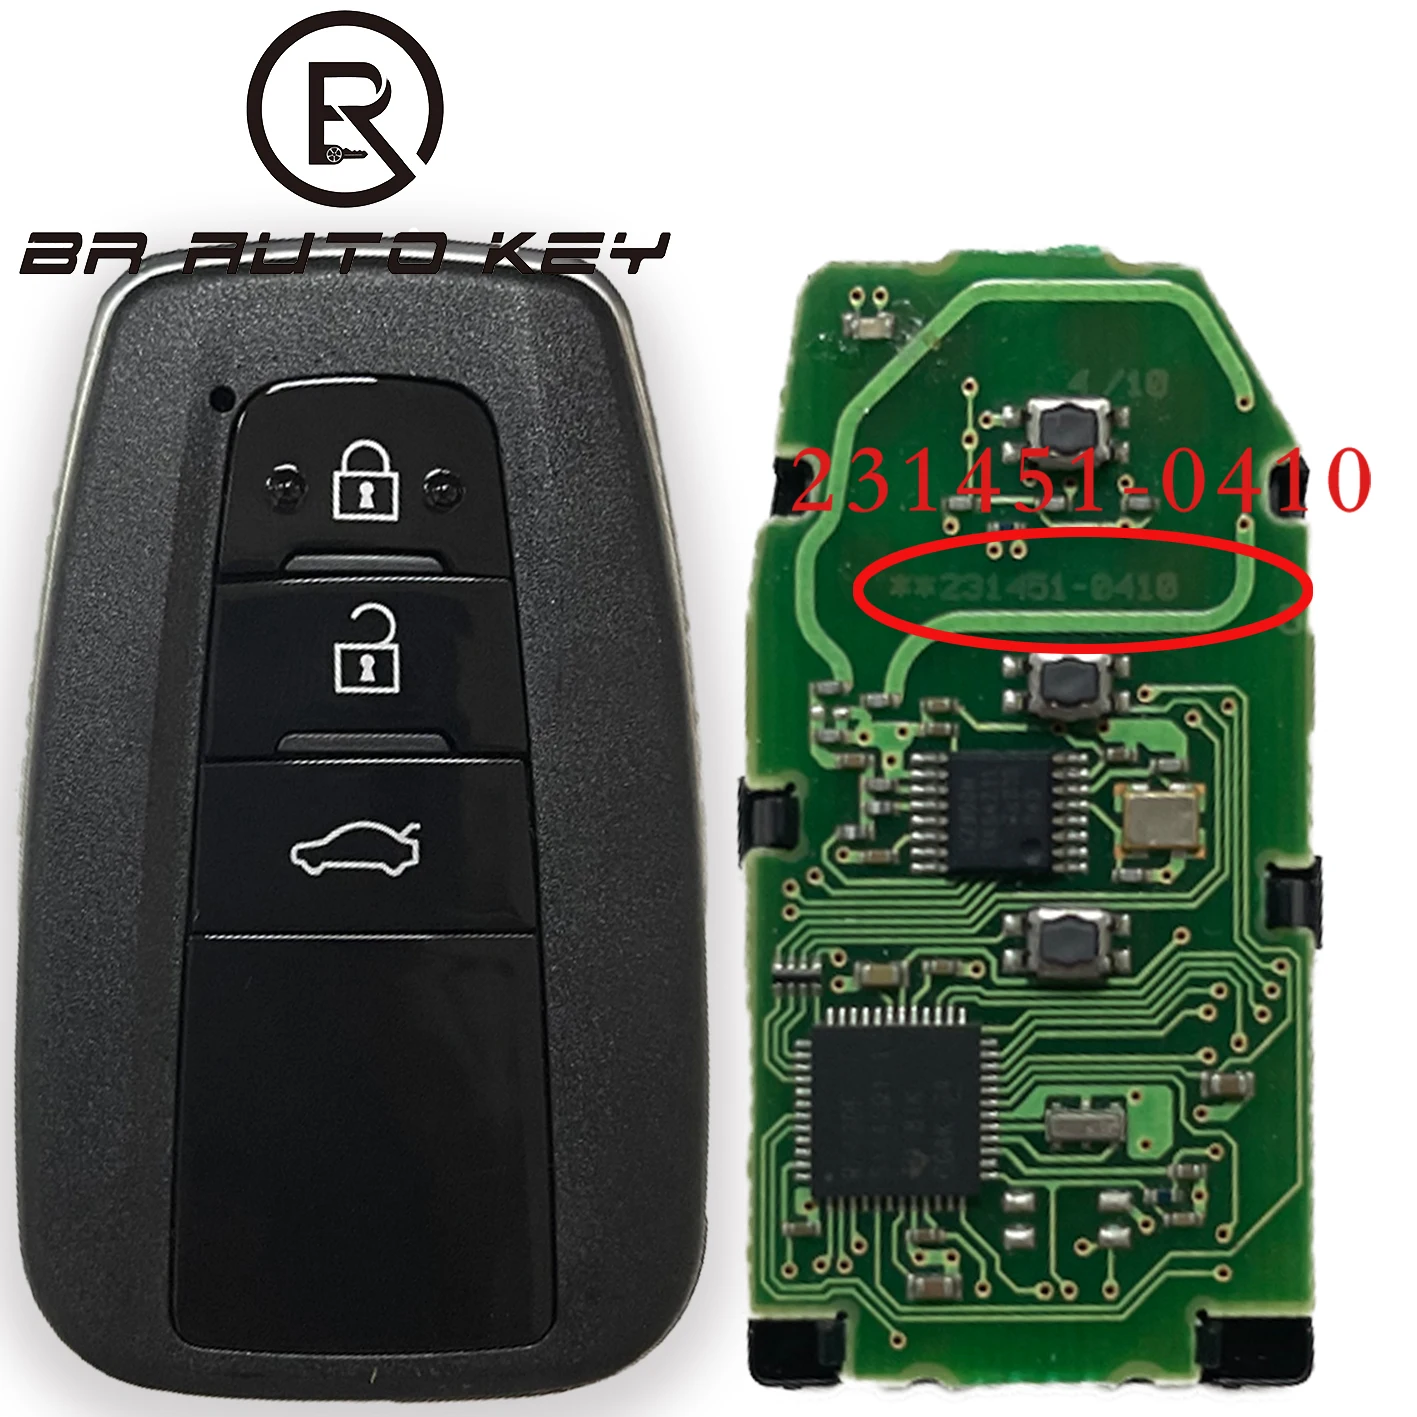 Original Proximity Smart Remote Car Key Fob for Toyota Camry 2017 2018 2019 2020 434Mhz with 8A Chip ID:H Board NO: 231451-0410